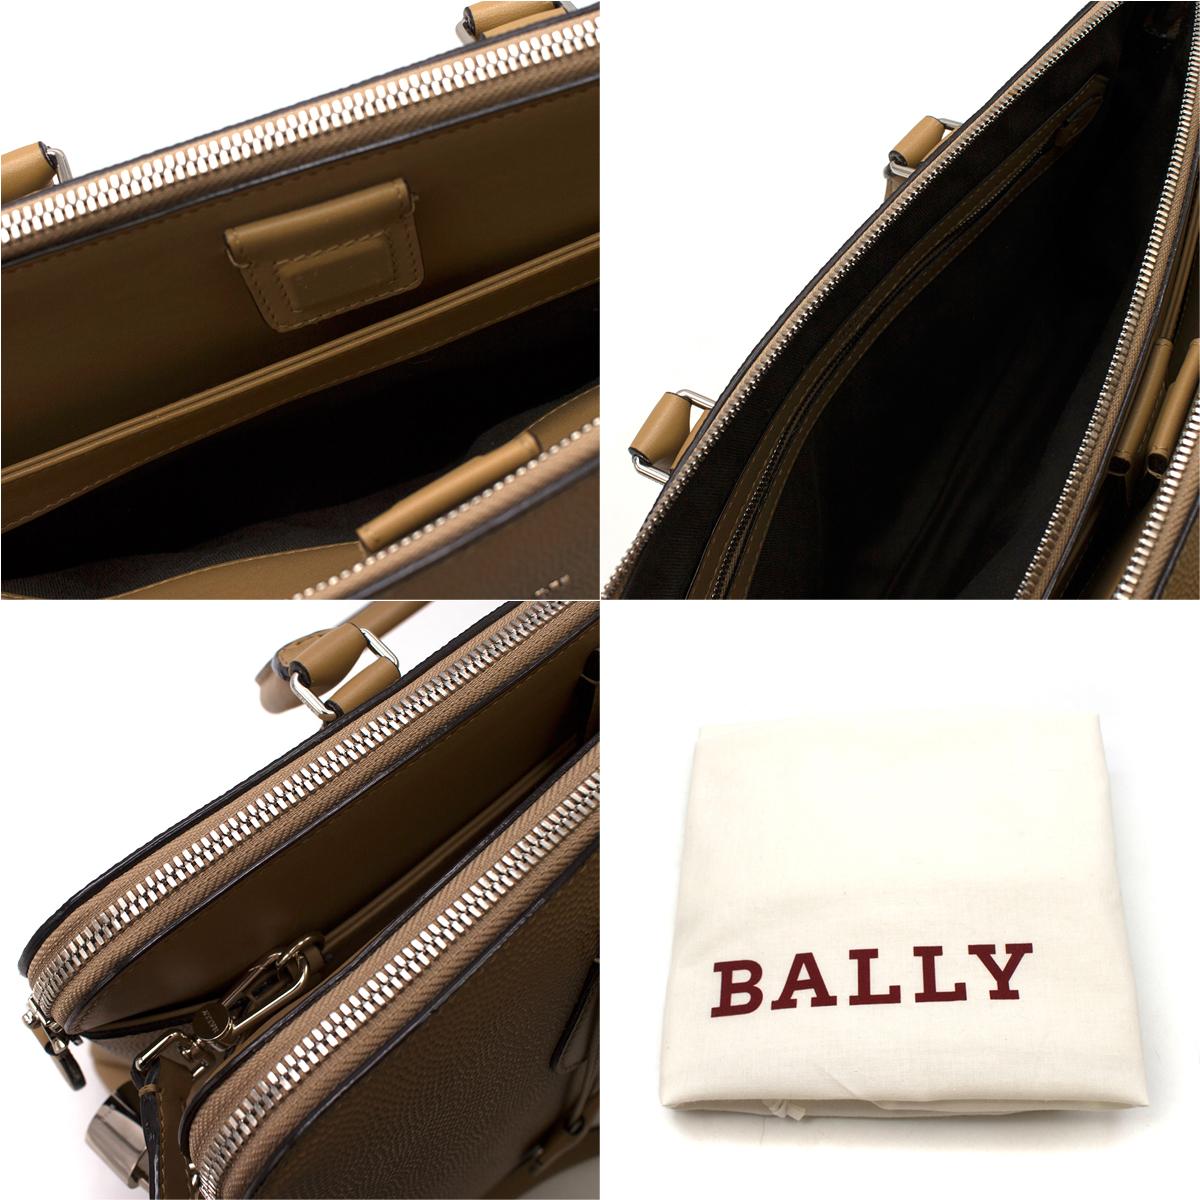 Bally camel-brown hammered-leather tote bag For Sale 3